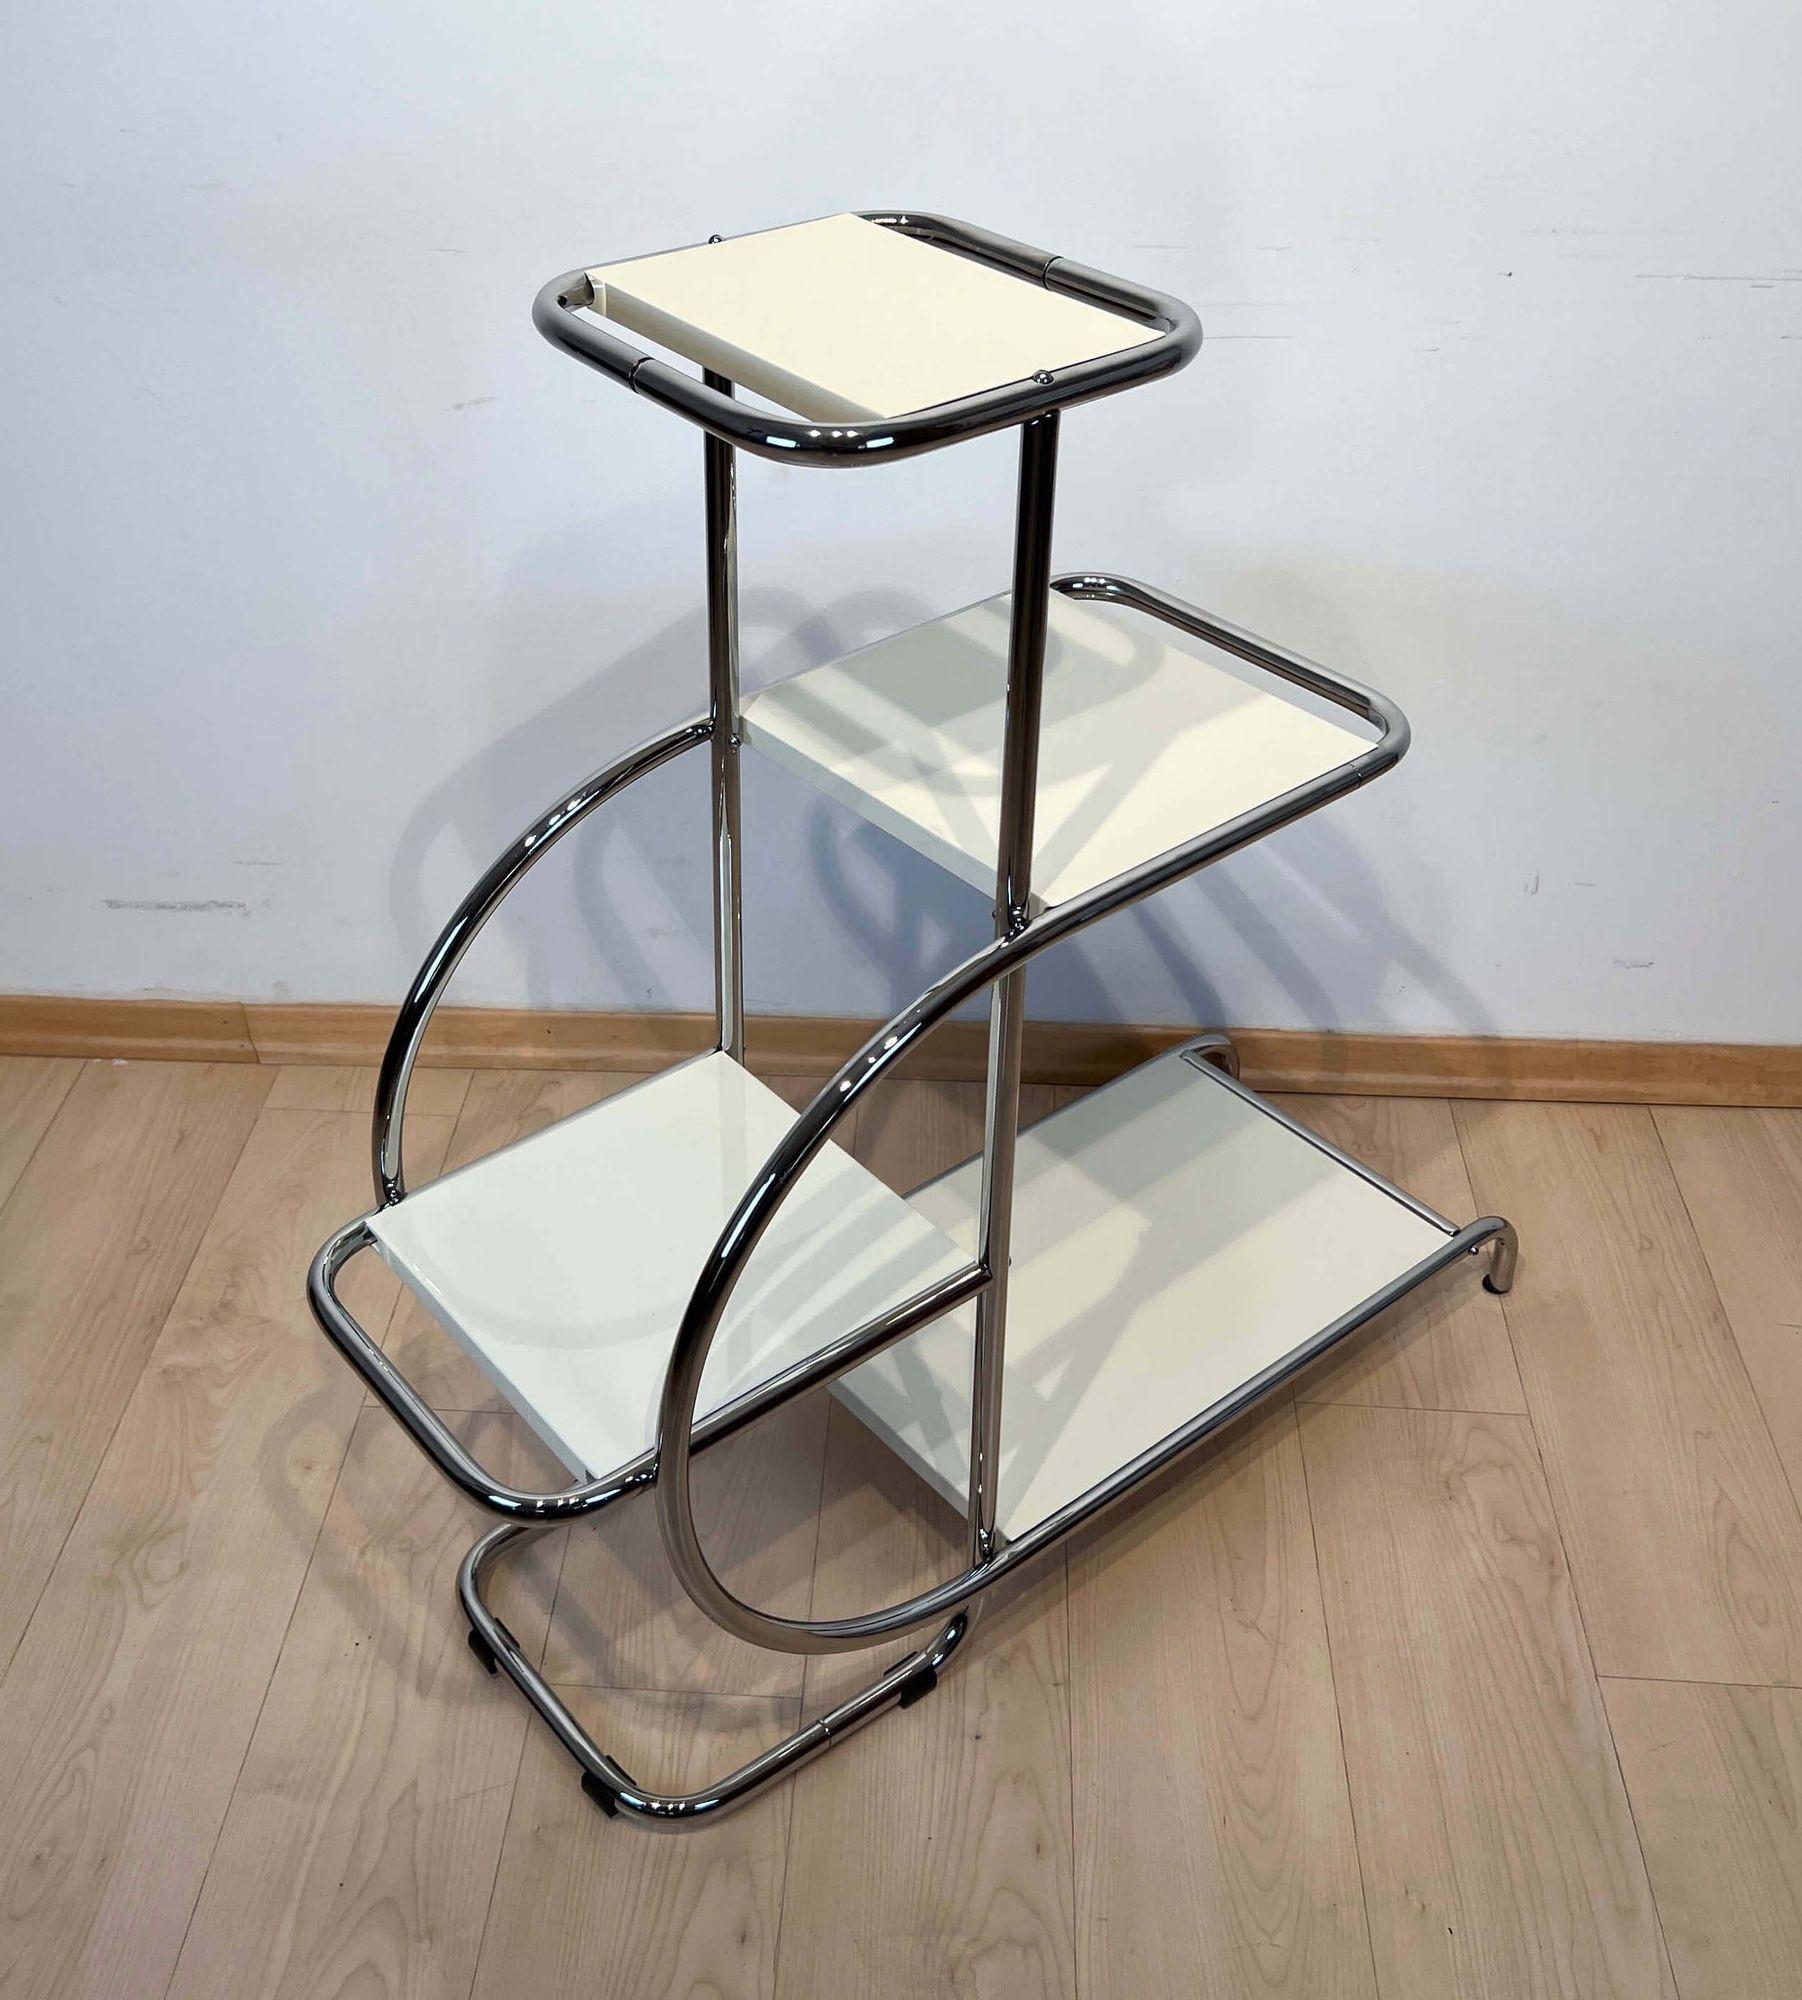 Bauhaus Steeltube Etagere, Creme-White Lacquer, Nickel Plate, Germany, 1930s In Excellent Condition For Sale In Regensburg, DE